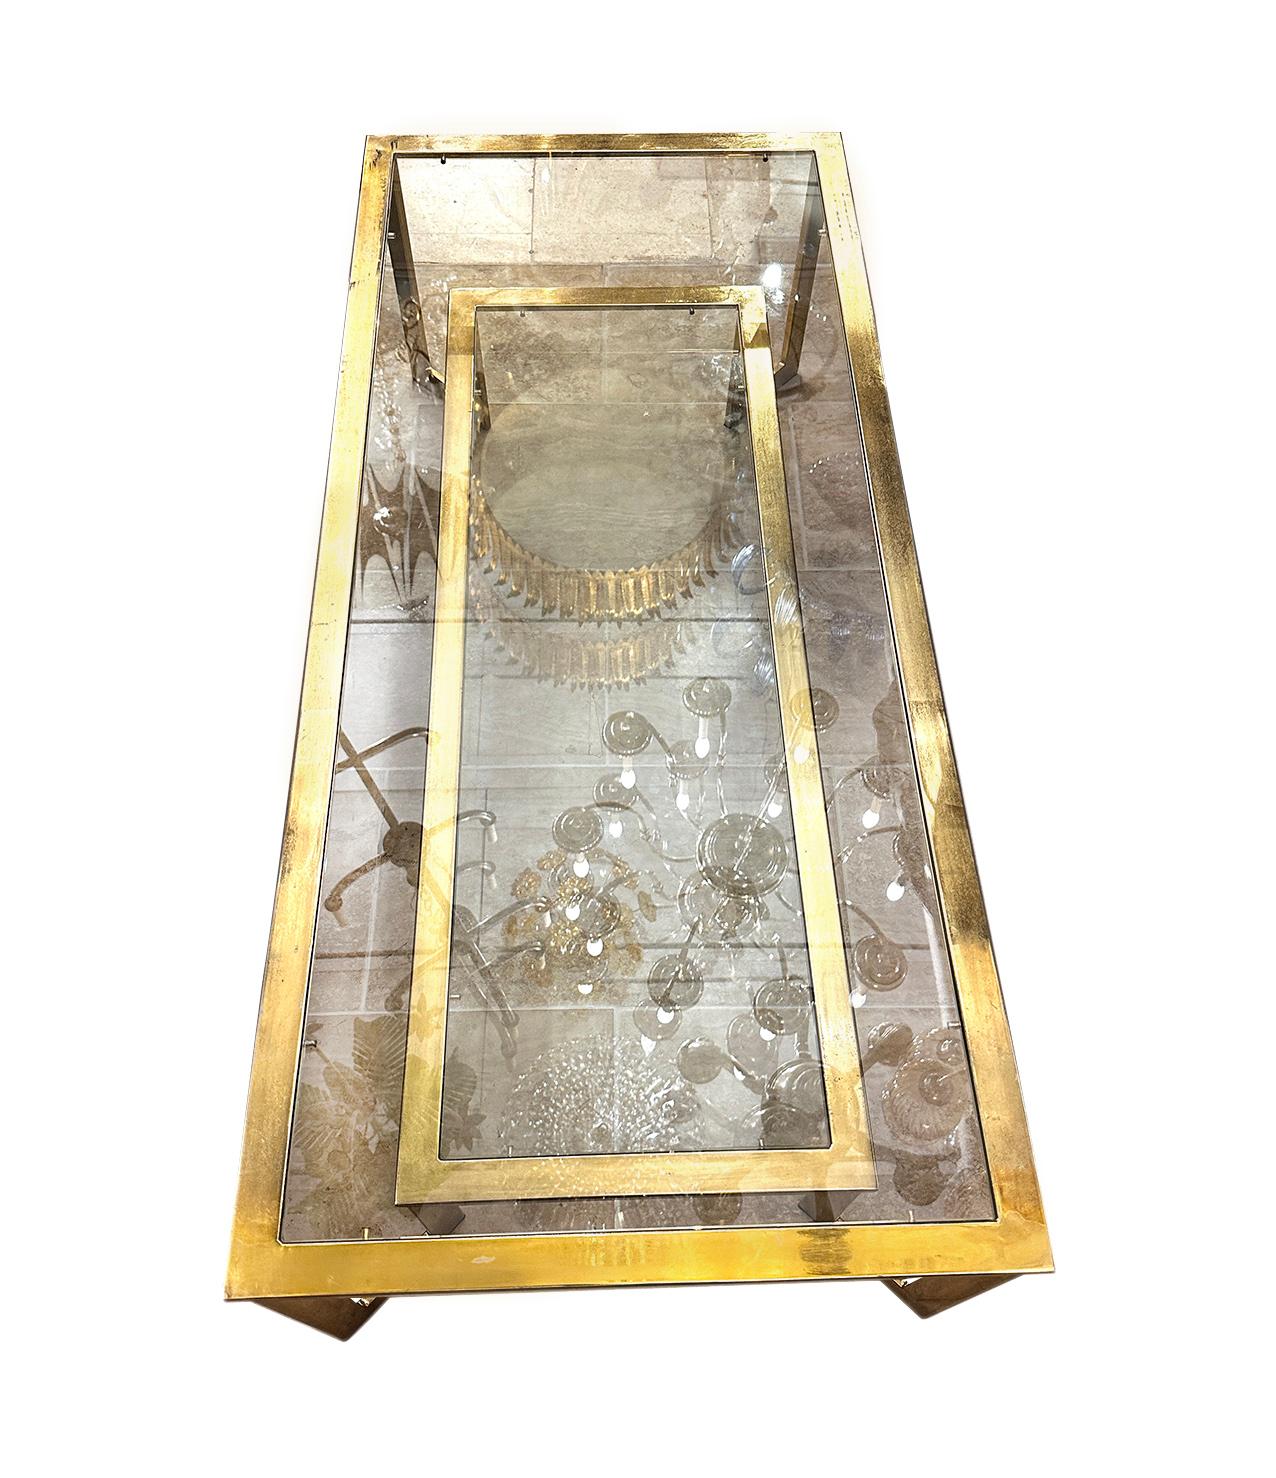 A circa 1960s Italian coffee table with 2 levels of glass.

Measurements:
Height: 15.5